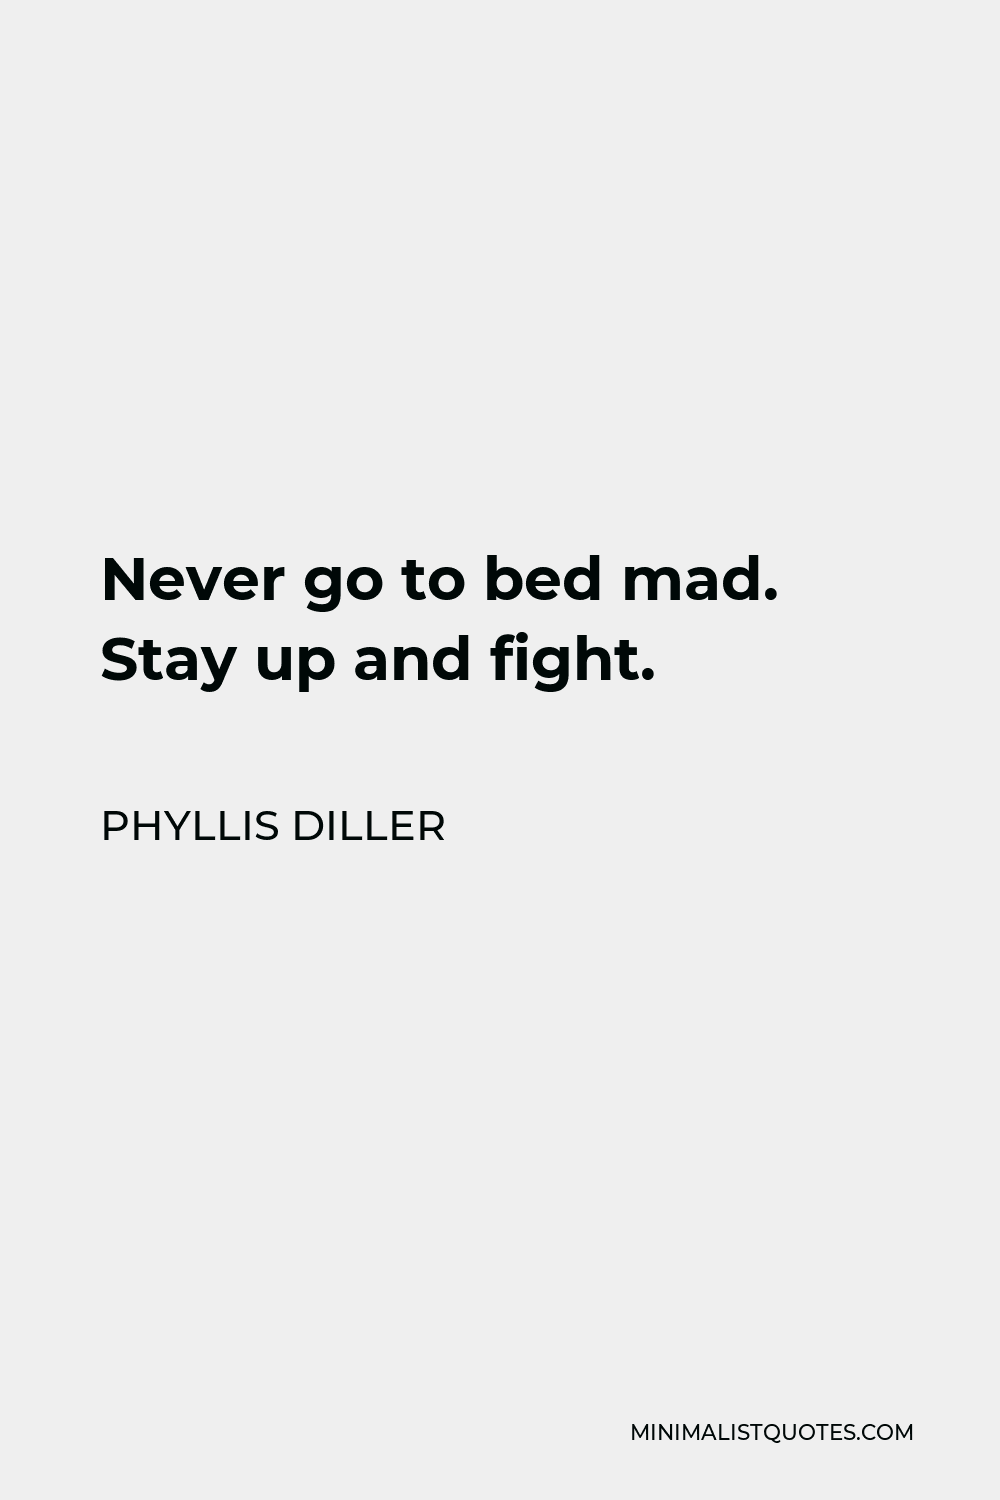 Phyllis Diller Quote - Never go to bed mad. Stay up and fight.